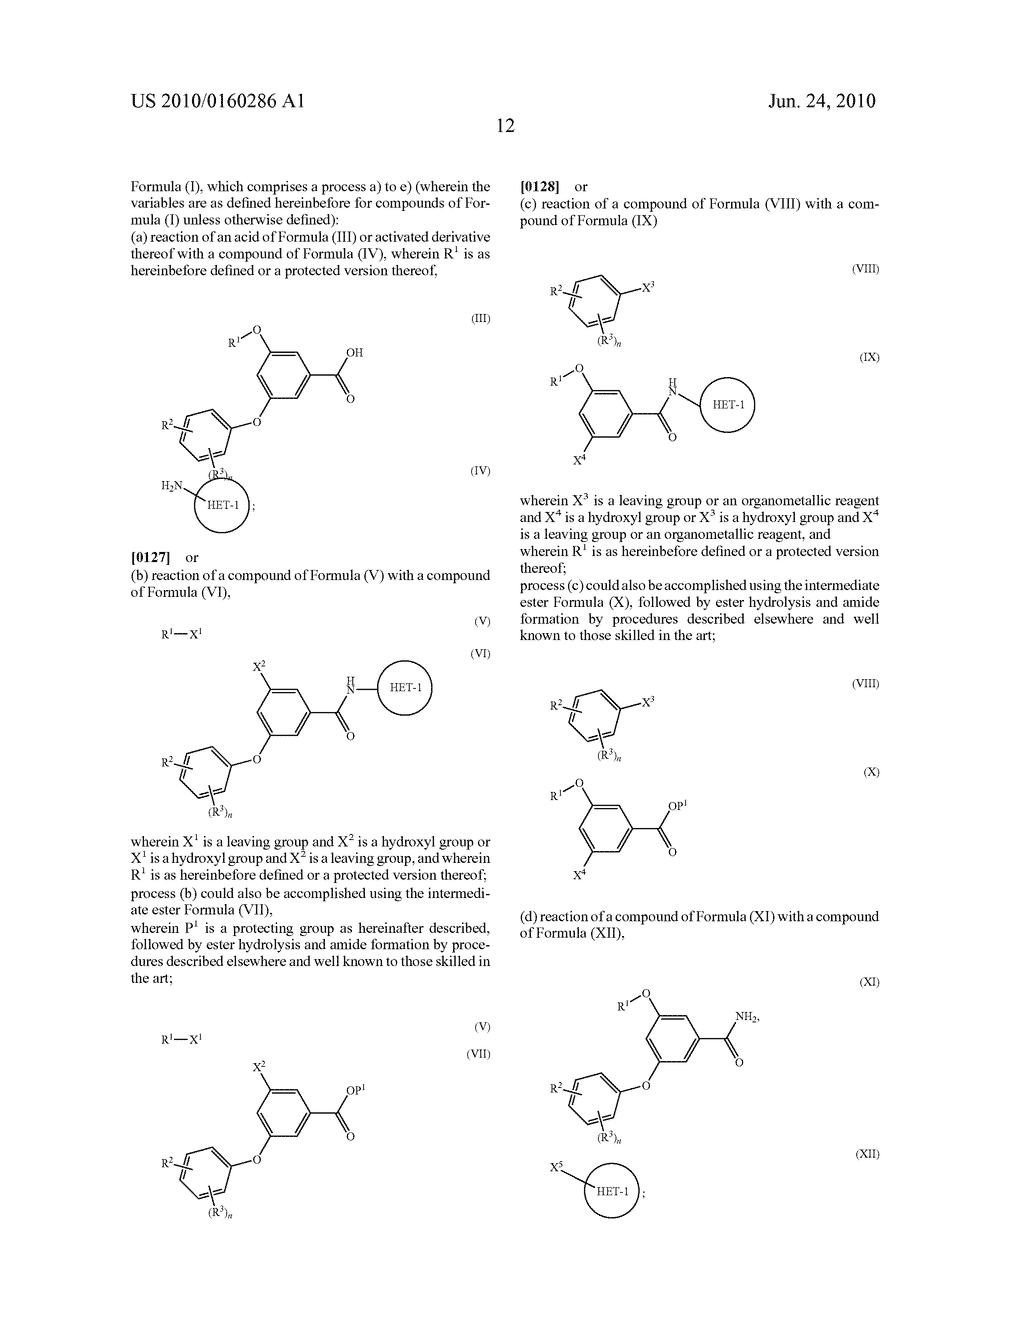 HETEROARYLCARBAMOYLBENZENE DERIVATIVES FOR THE TREATMENT OF DIABETES - diagram, schematic, and image 13